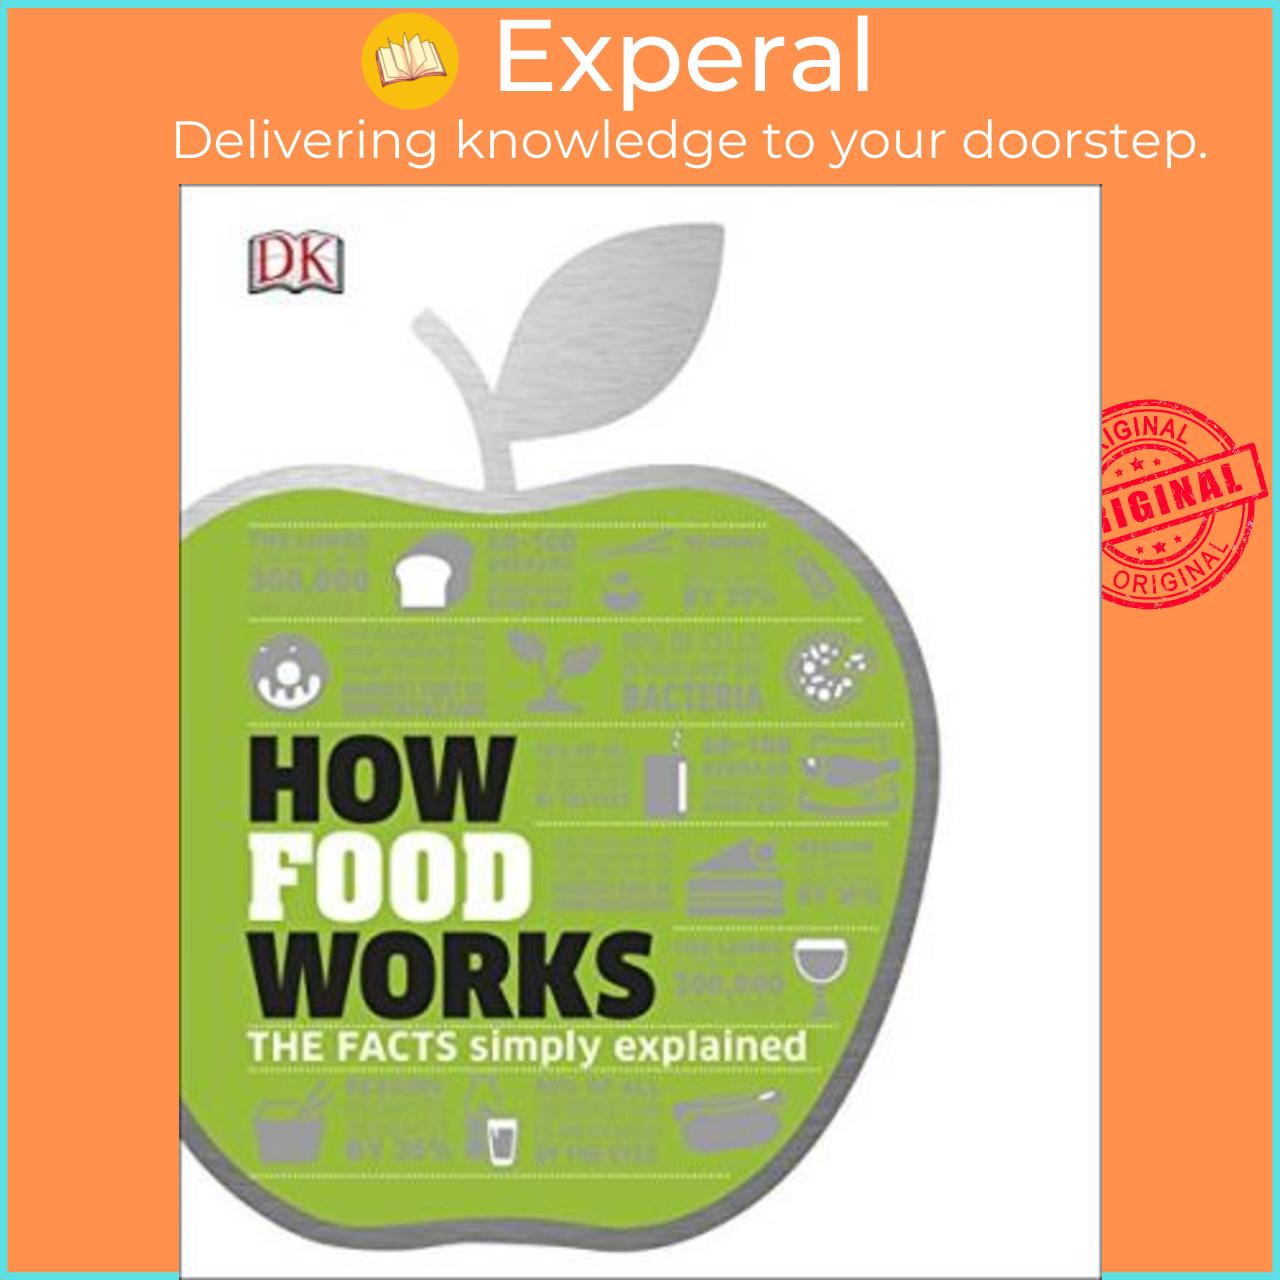 Sách - How Food Works : The Facts Visually Explained by DK (UK edition, hardcover)